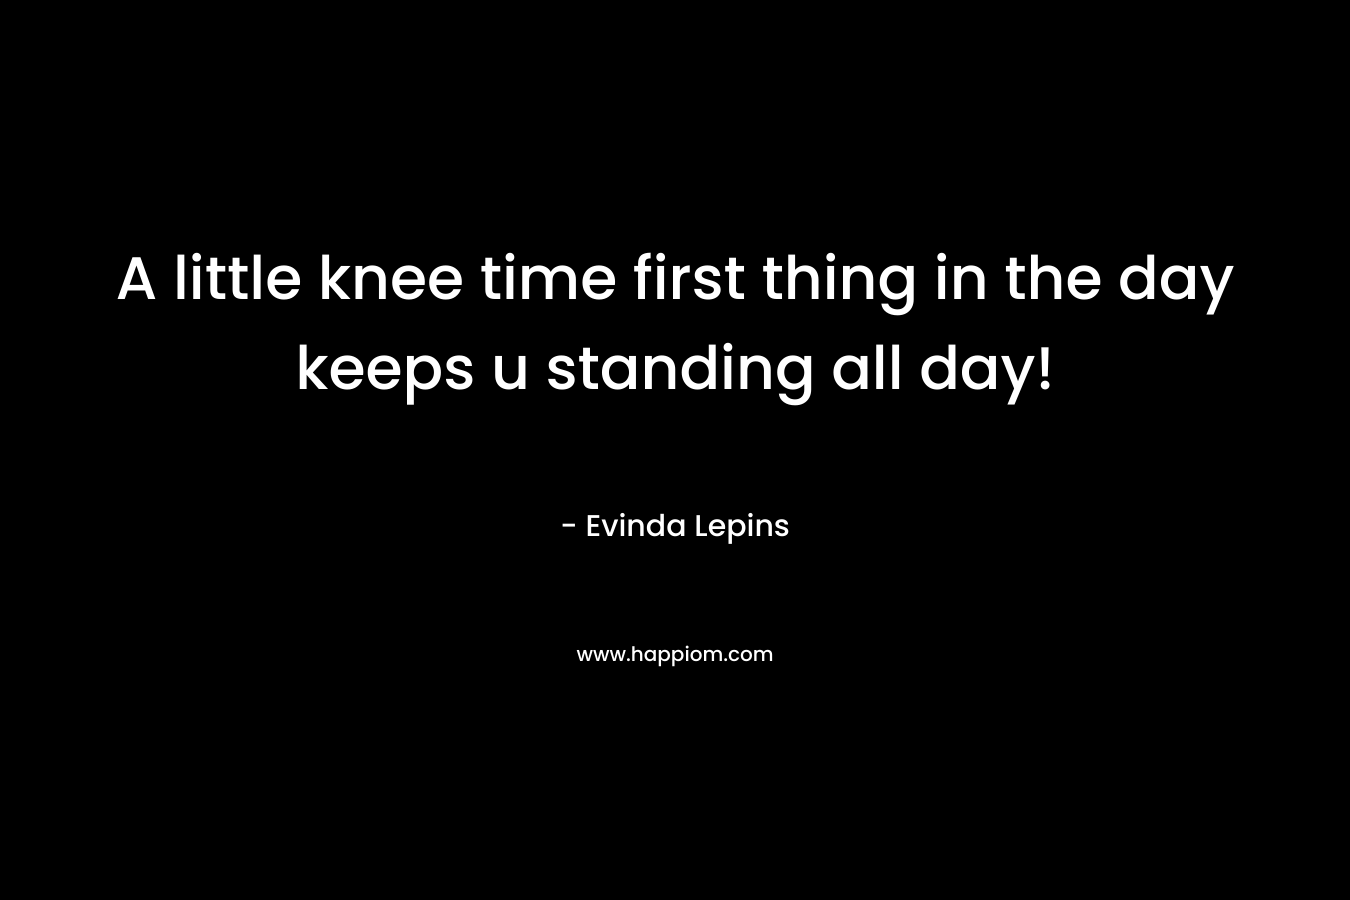 A little knee time first thing in the day keeps u standing all day!